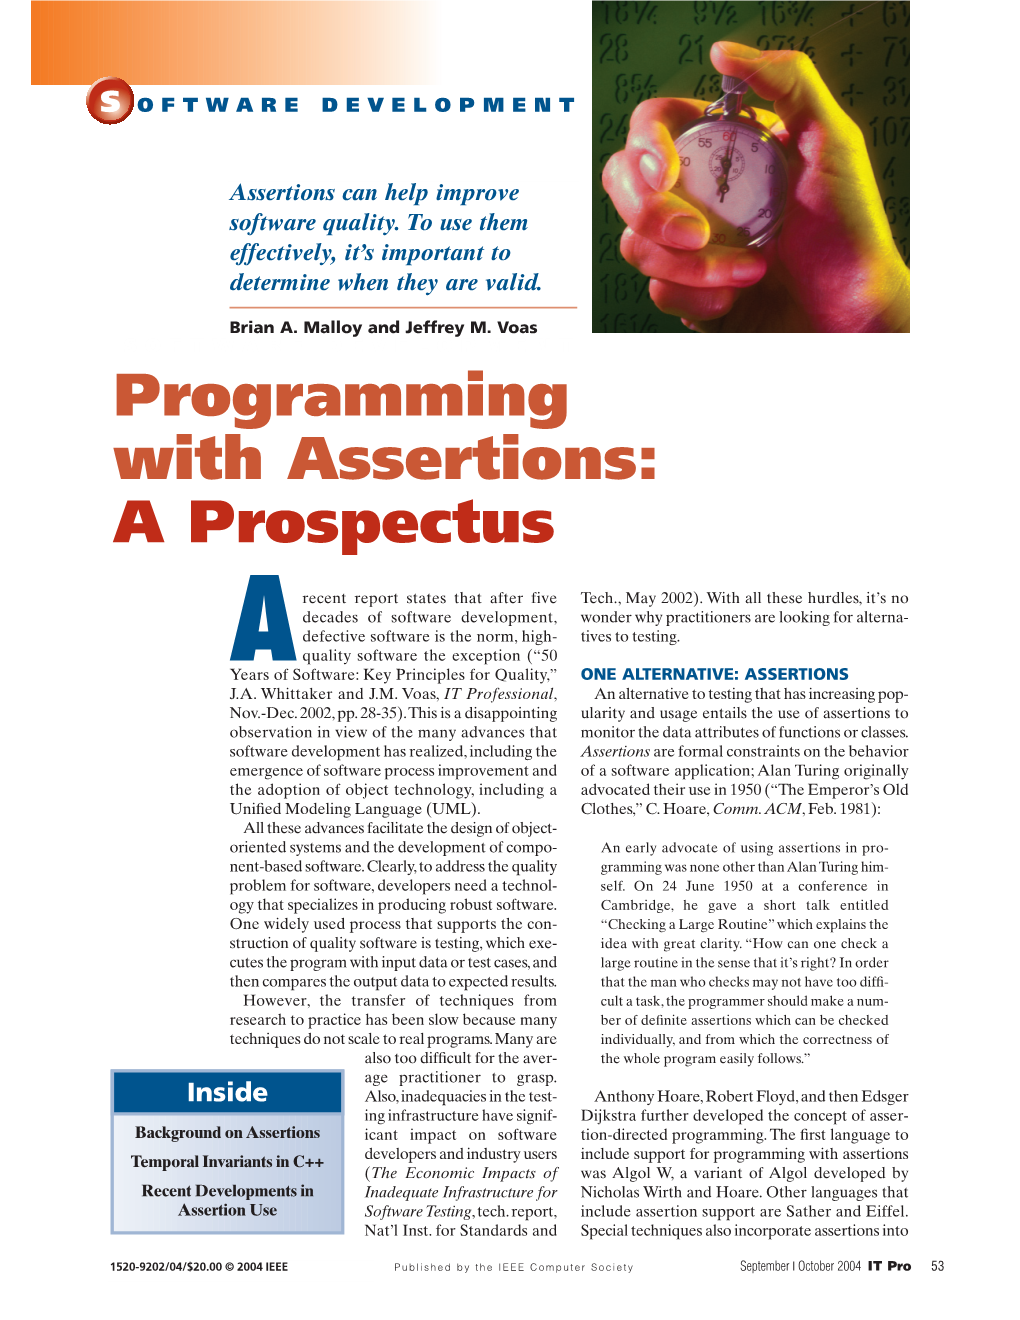 Programming with Assertions: a Prospectus